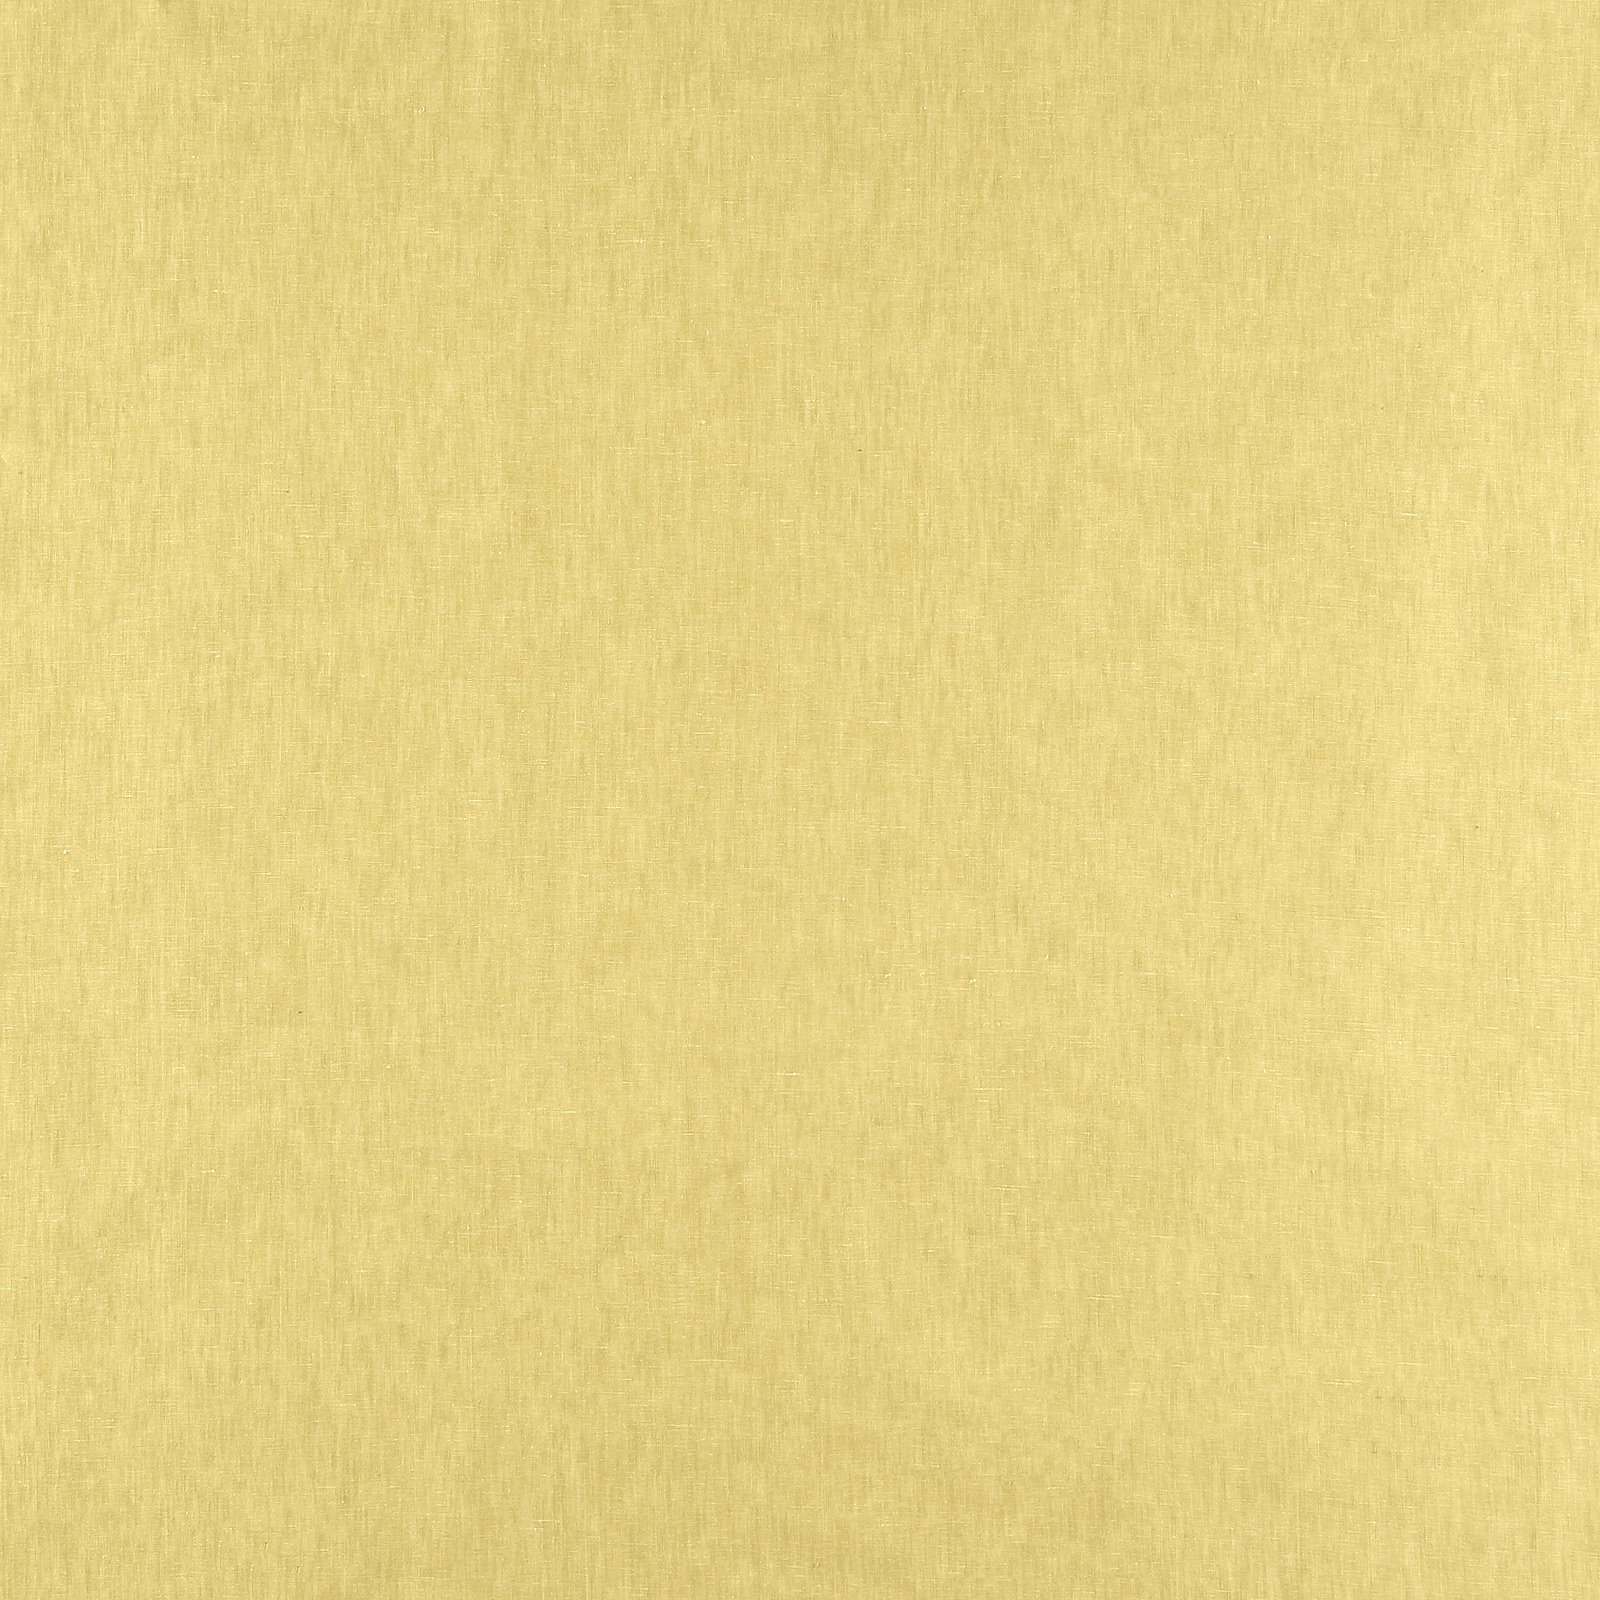 Light linen light olive yellow 852435_pack_solid